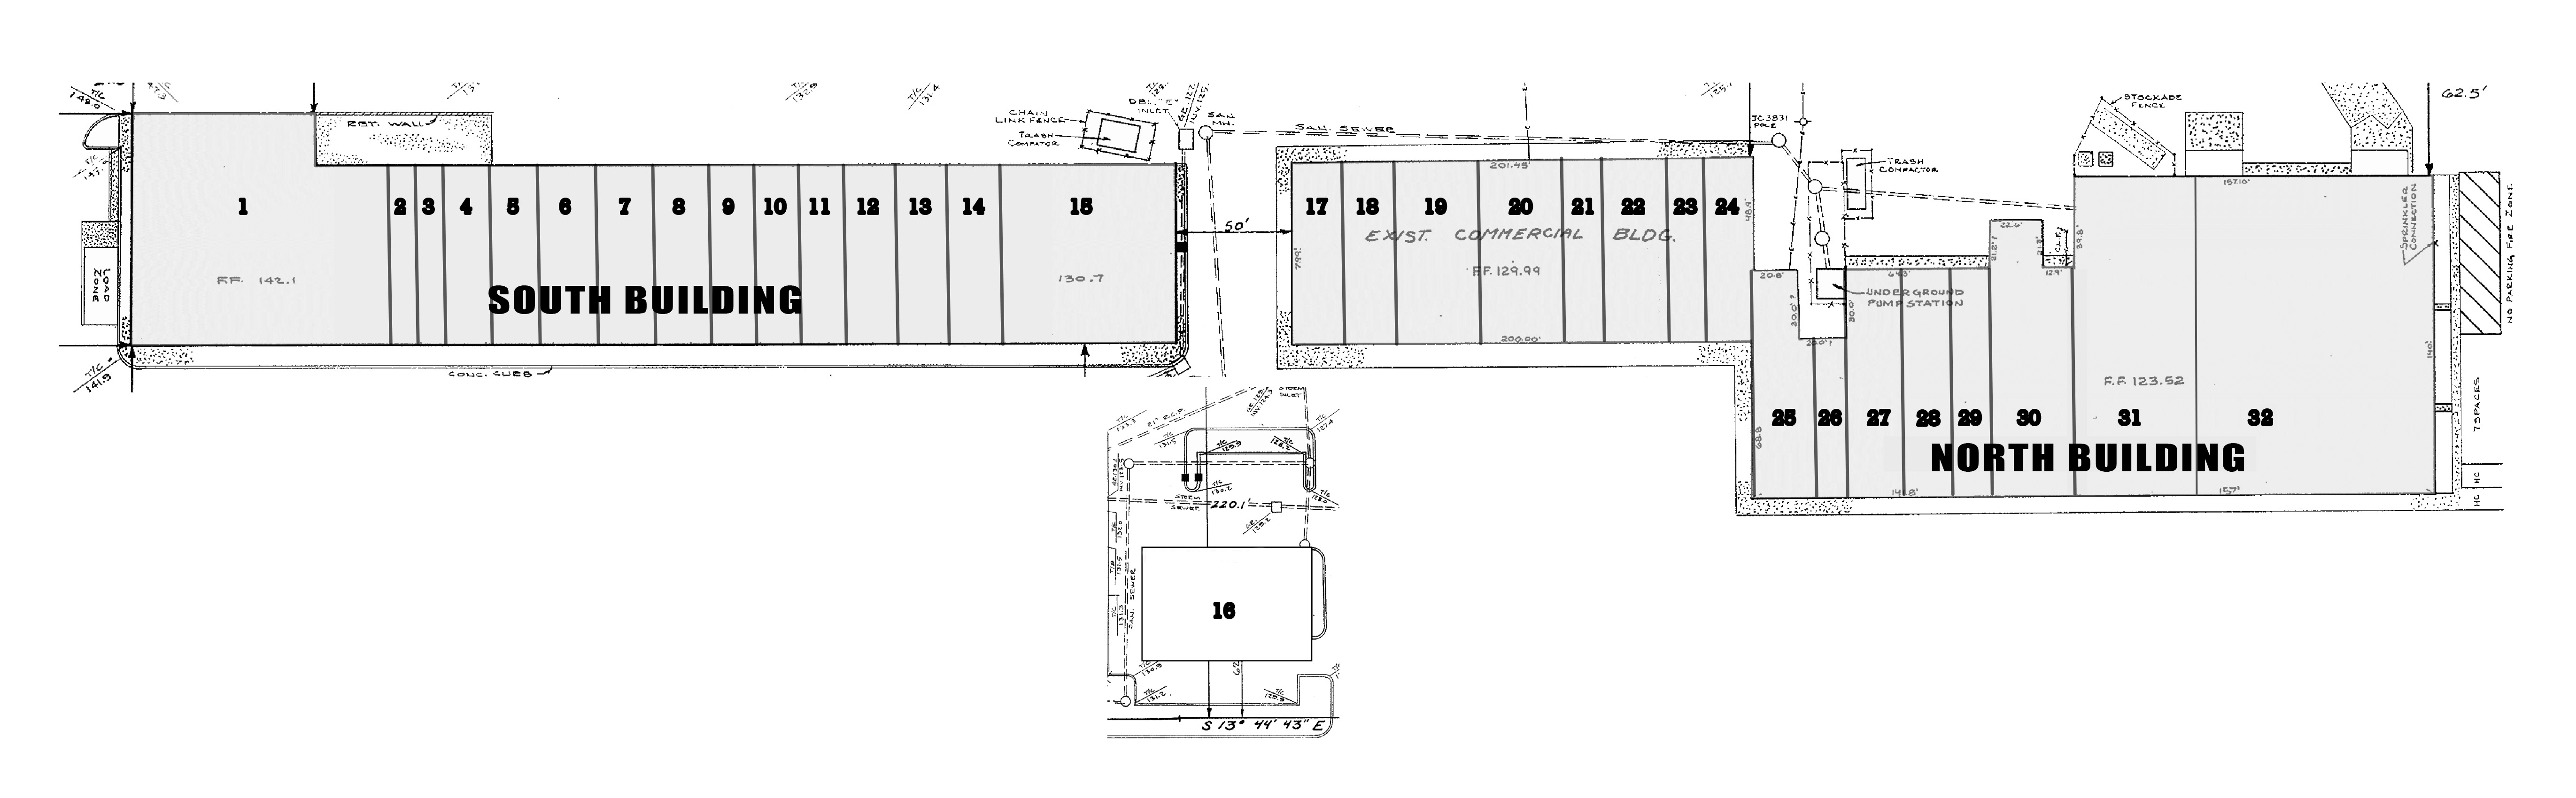 Howell Plaza Site Plan